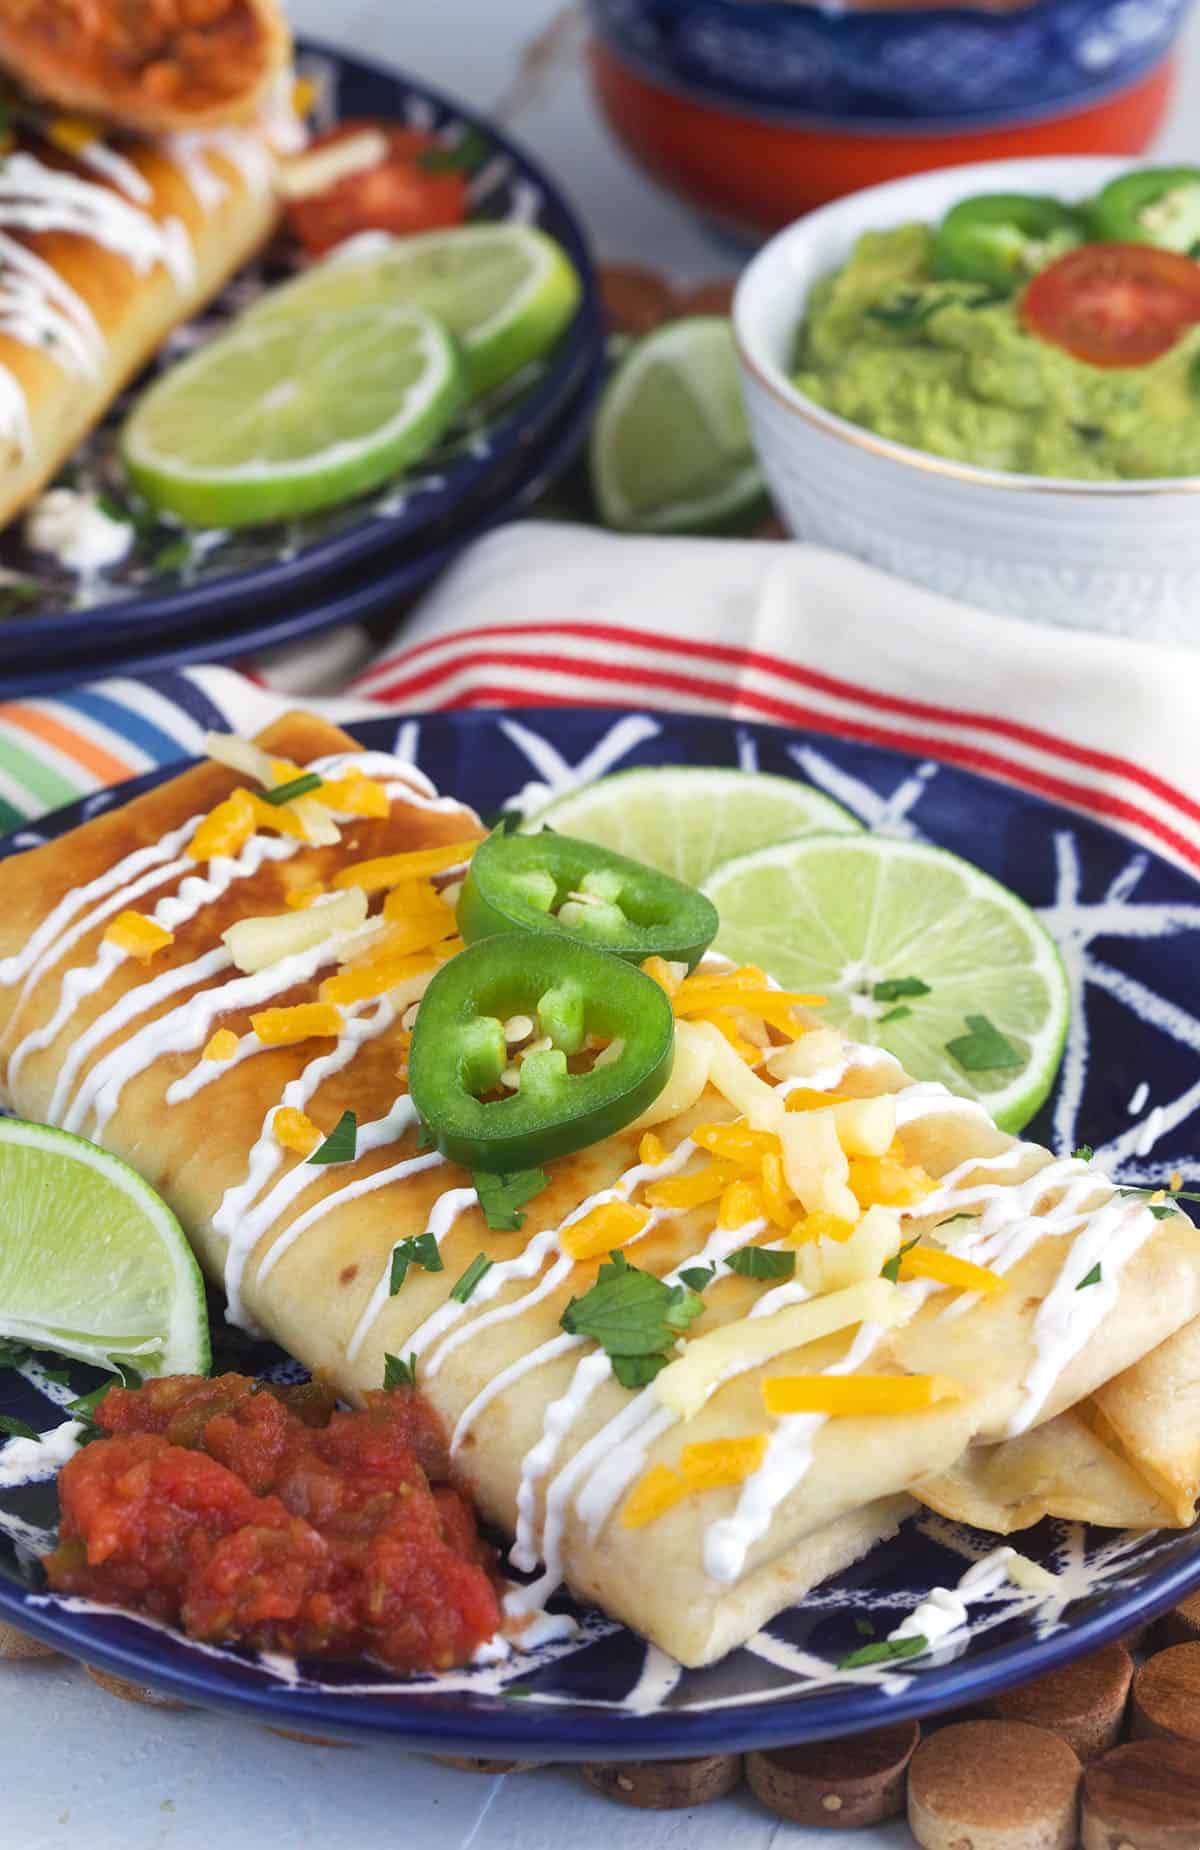 Garnished and plated chimichangas are plated next to salsa and limes.